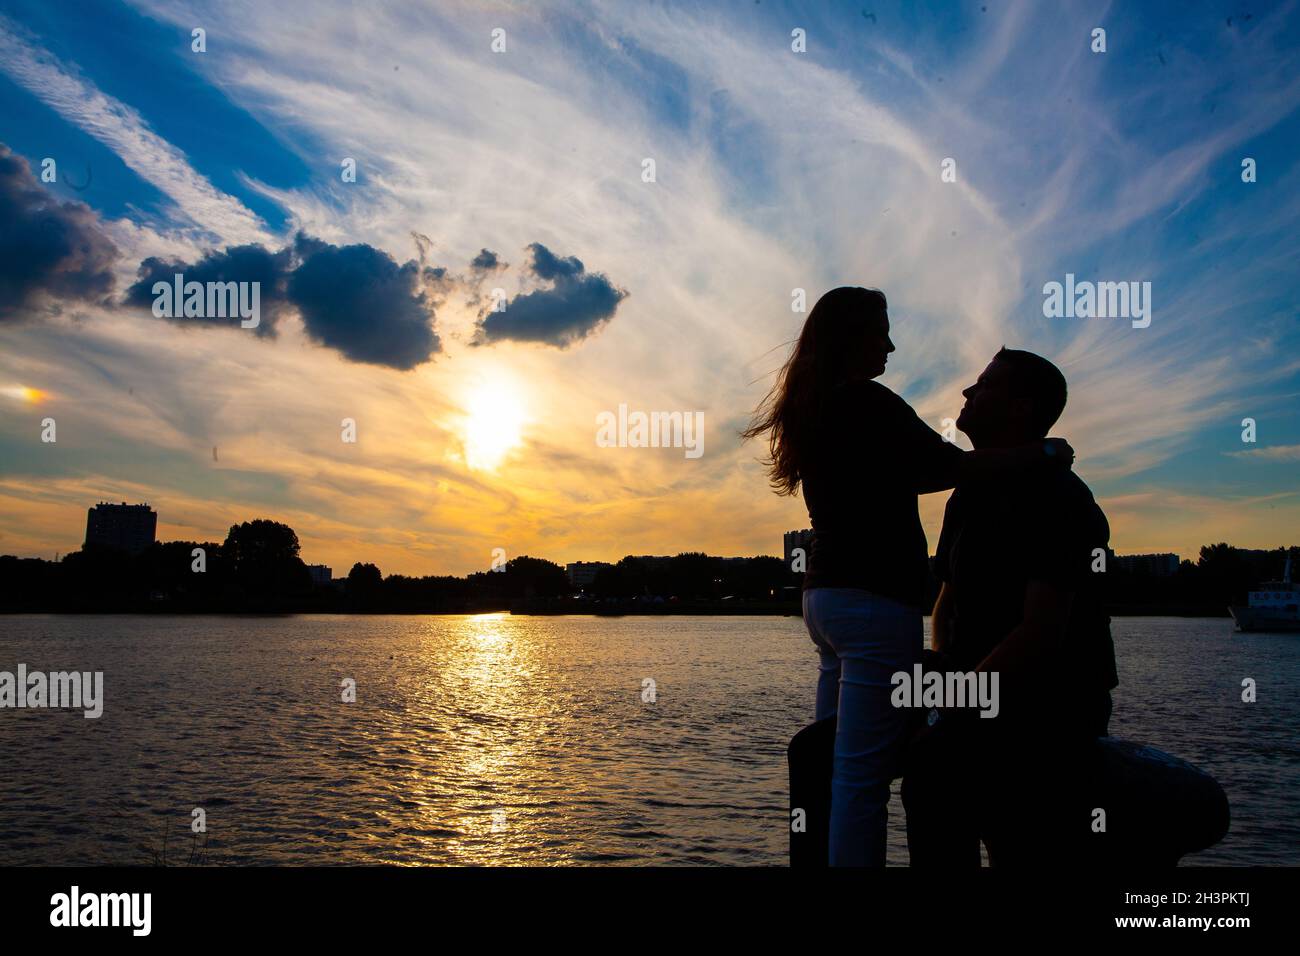 Silhouette of a couple in love during sunset Stock Photo